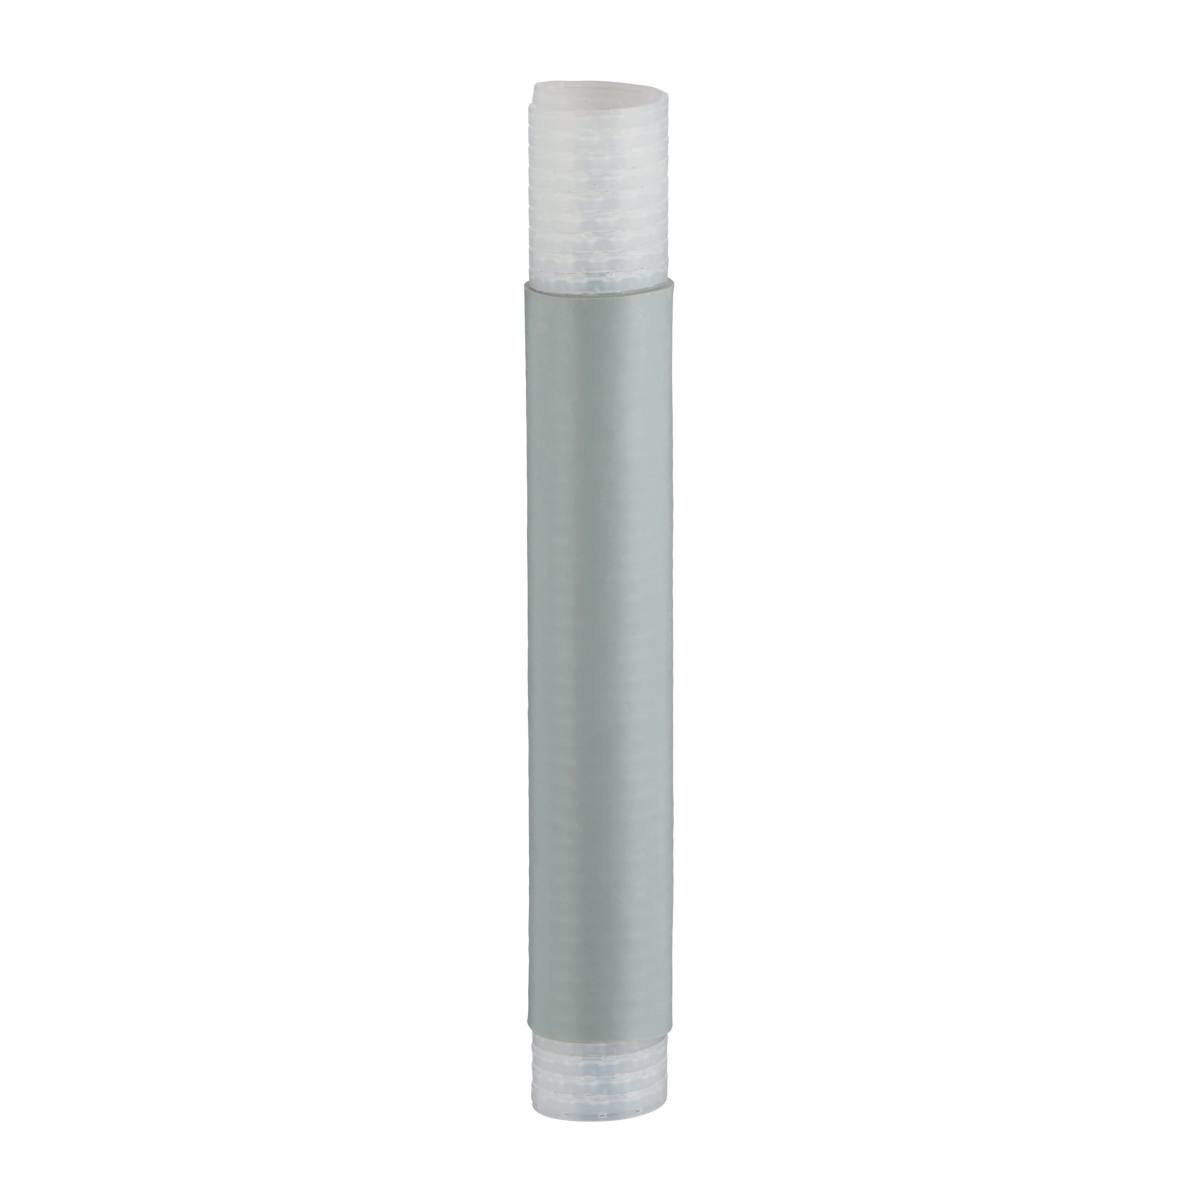 3M 8447.8 Cold-shrink tubing, silicone, light gray, 24.2/14.1 mm, 184 mm